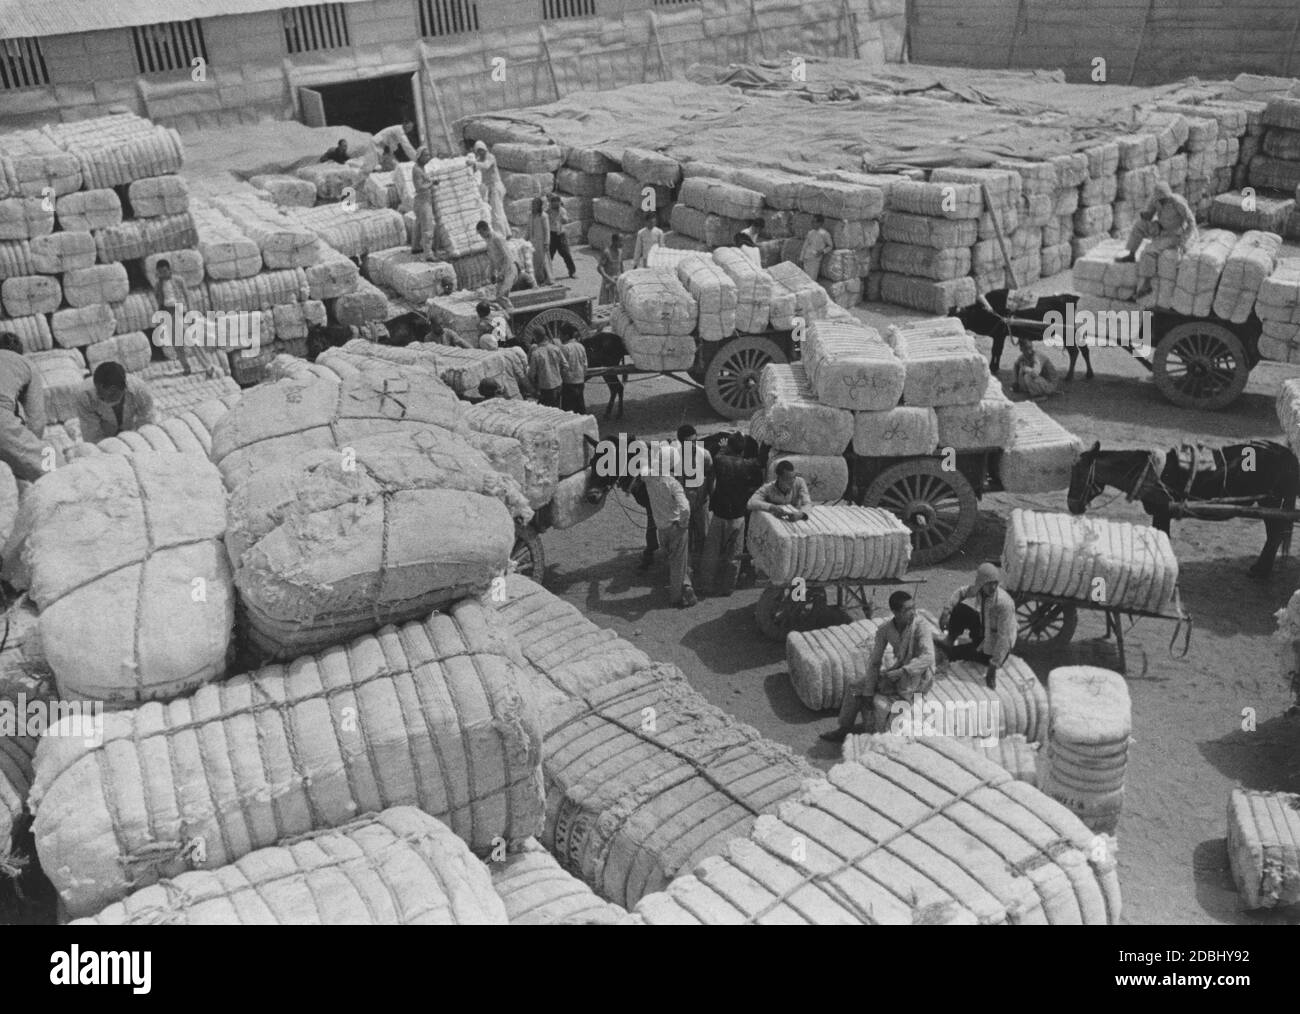 Warehouse of a cotton merchant in a city in China. The cotton is delivered and stacked by the farmers. Stock Photo